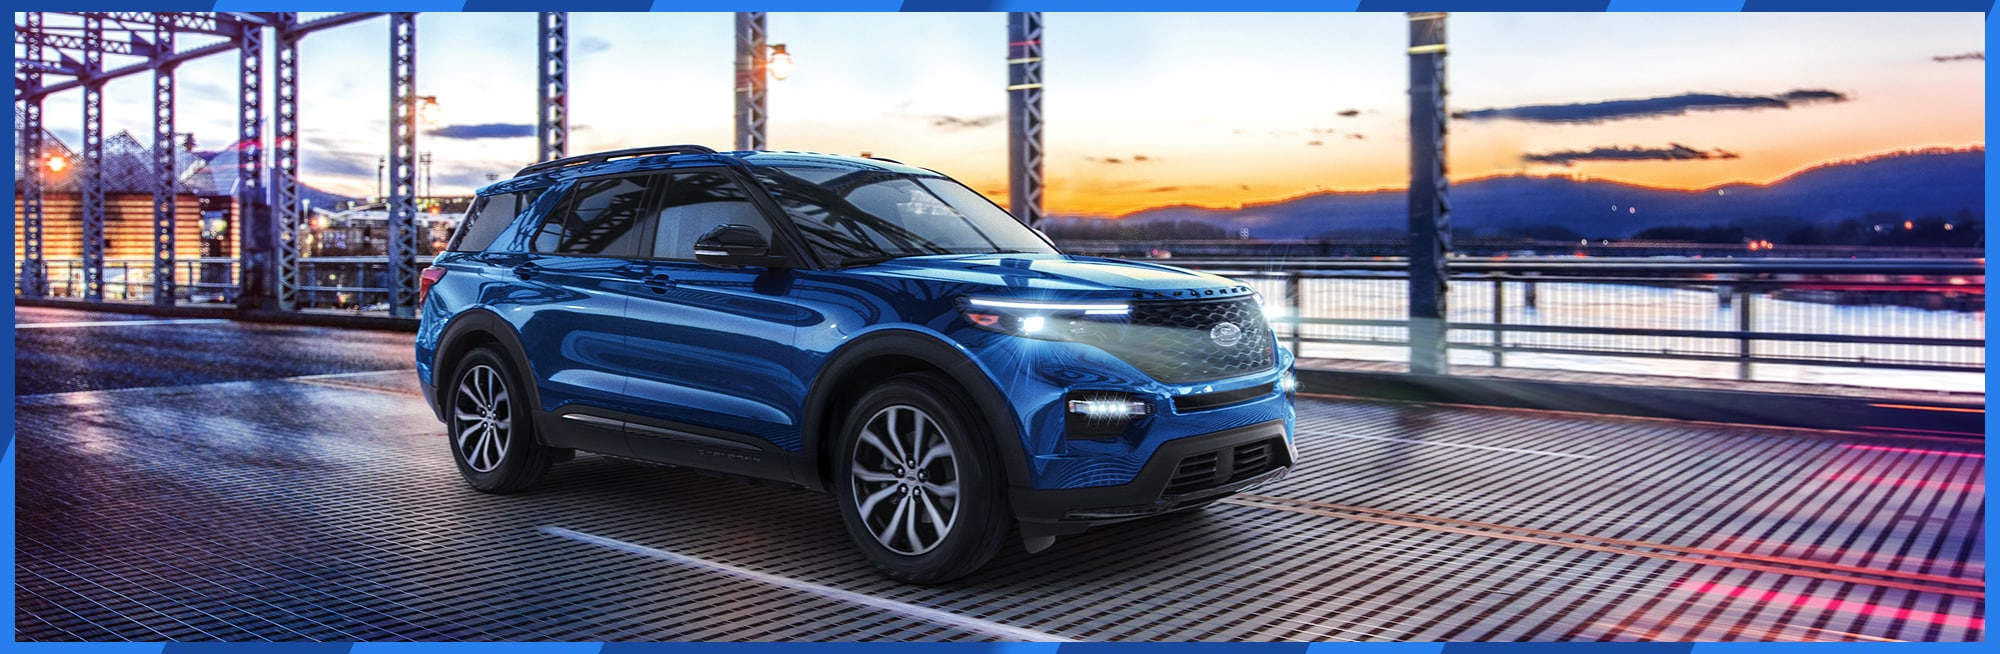 Customize A Ford Explorer